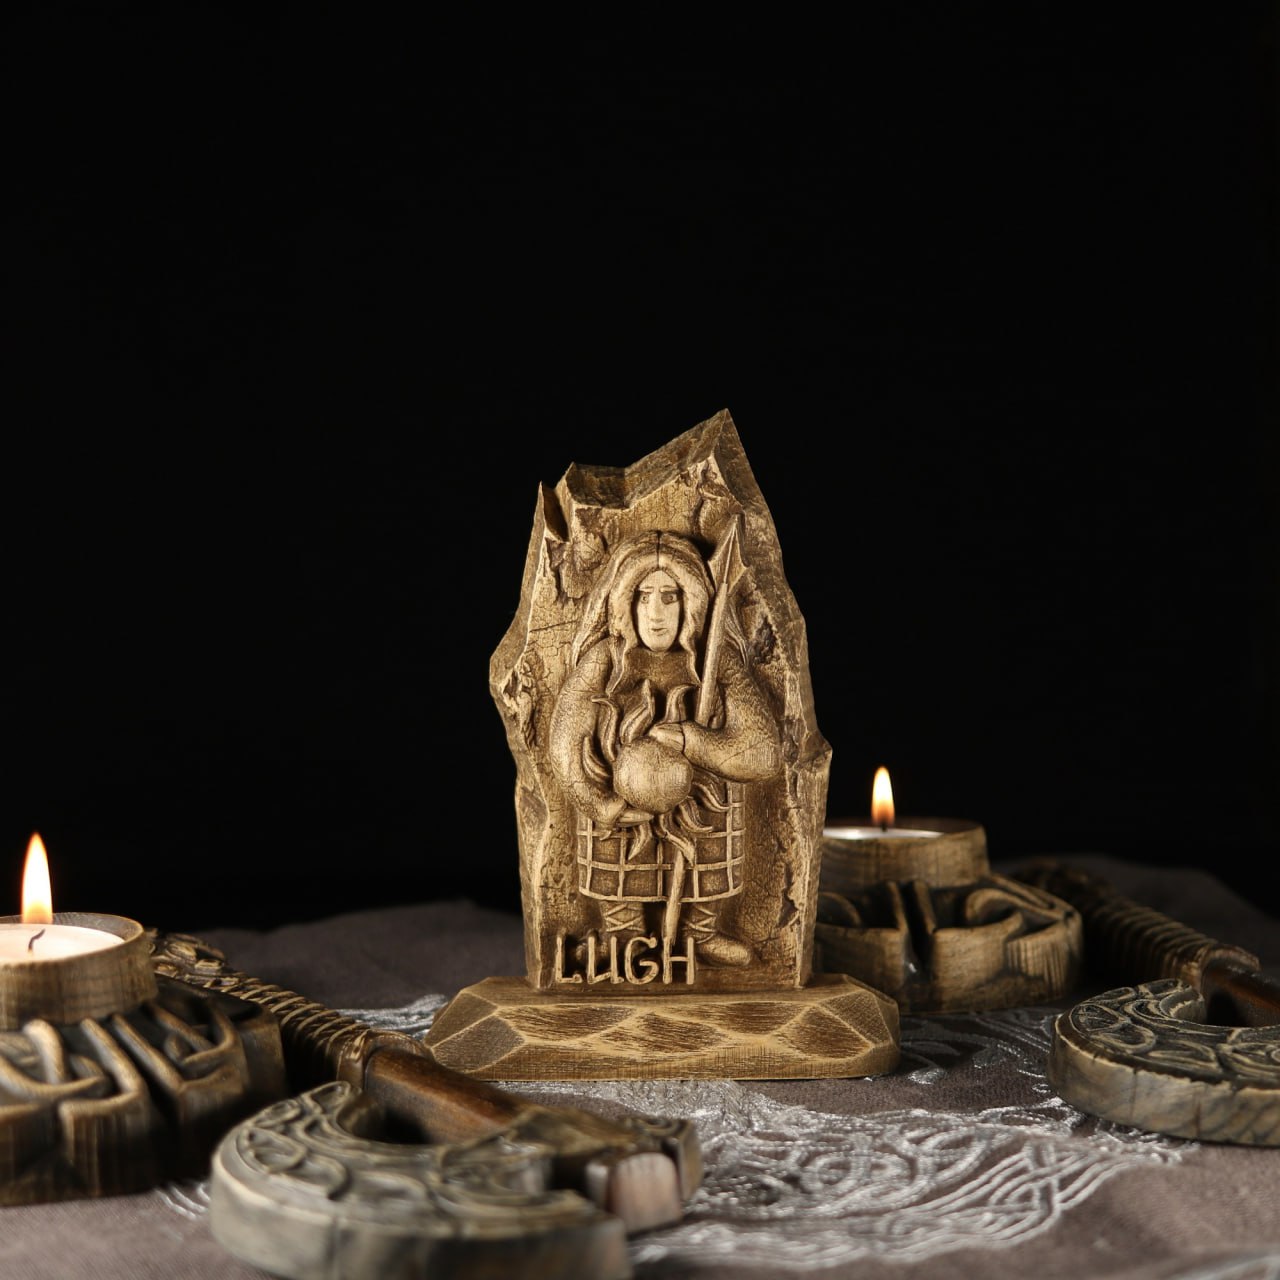 Handmade Wooden Statue Carving of Lugh, the God of Light and Crafts